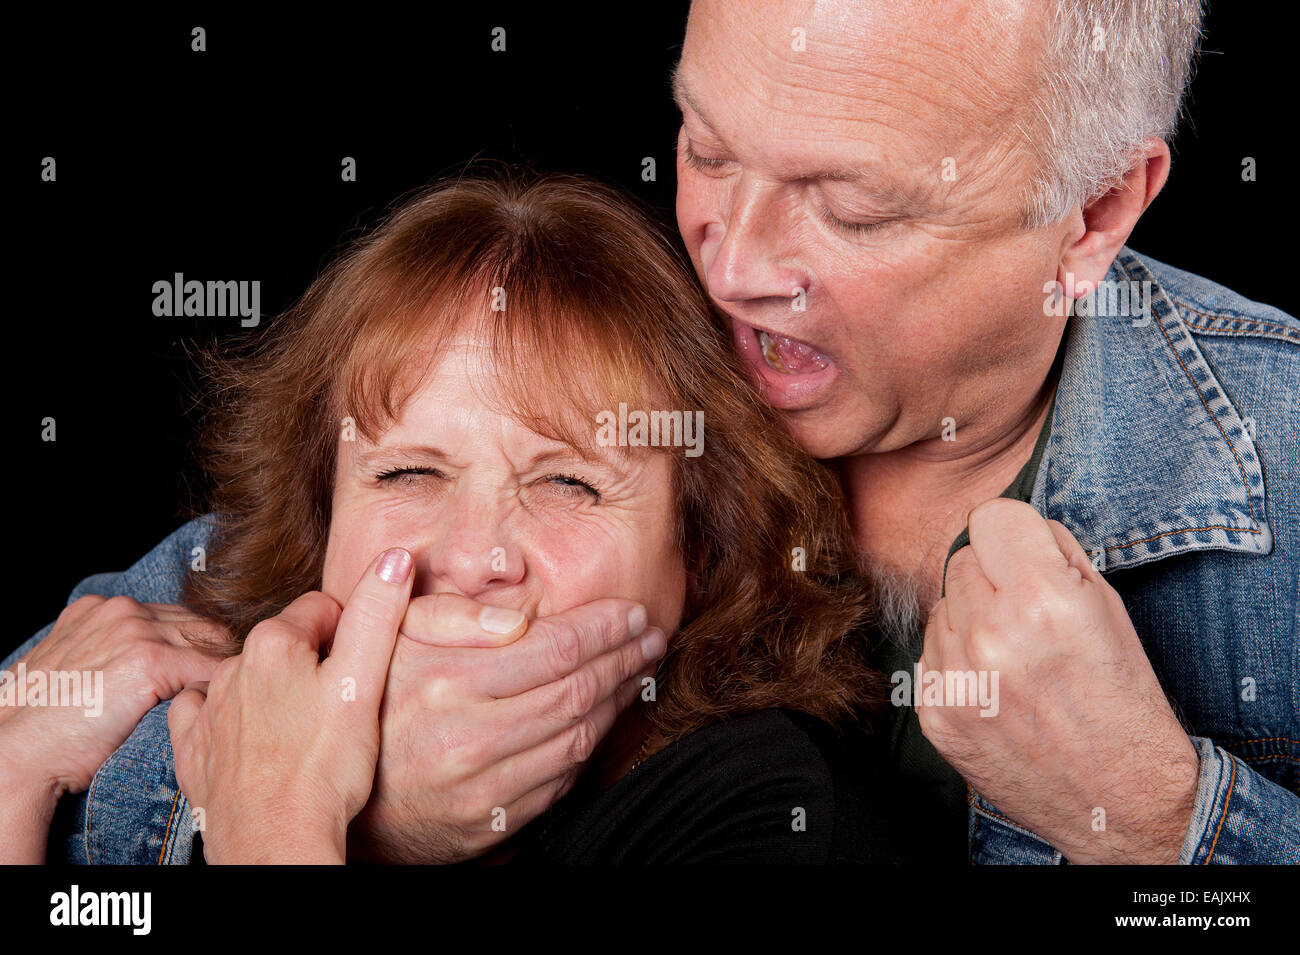 Man grabbing a woman from behind and threatening her with his fist. Stock Photo